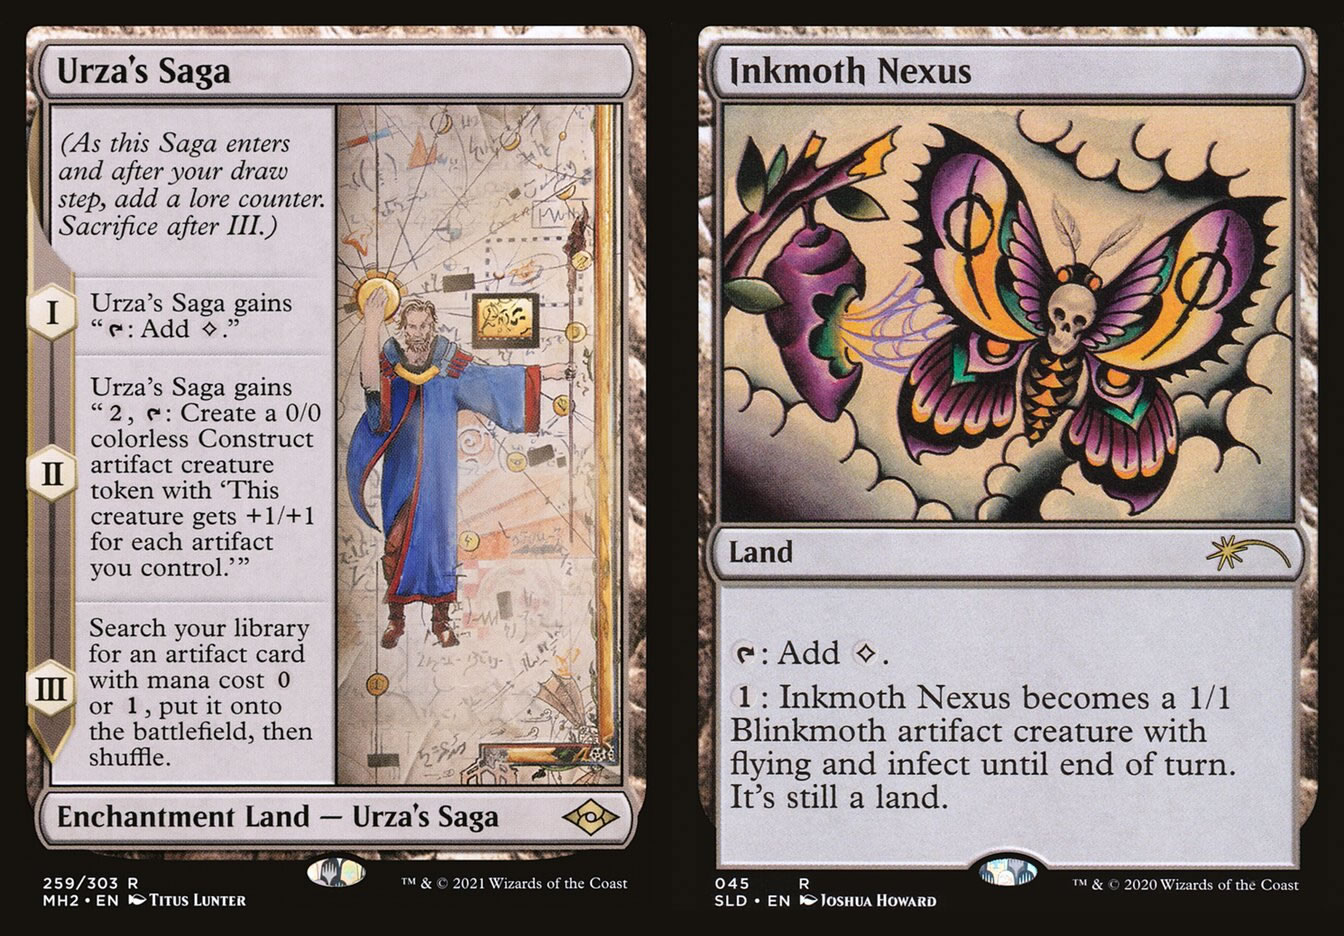 Two of the key cards of this archetype: Inkmonth Nexus and Urza's Saga